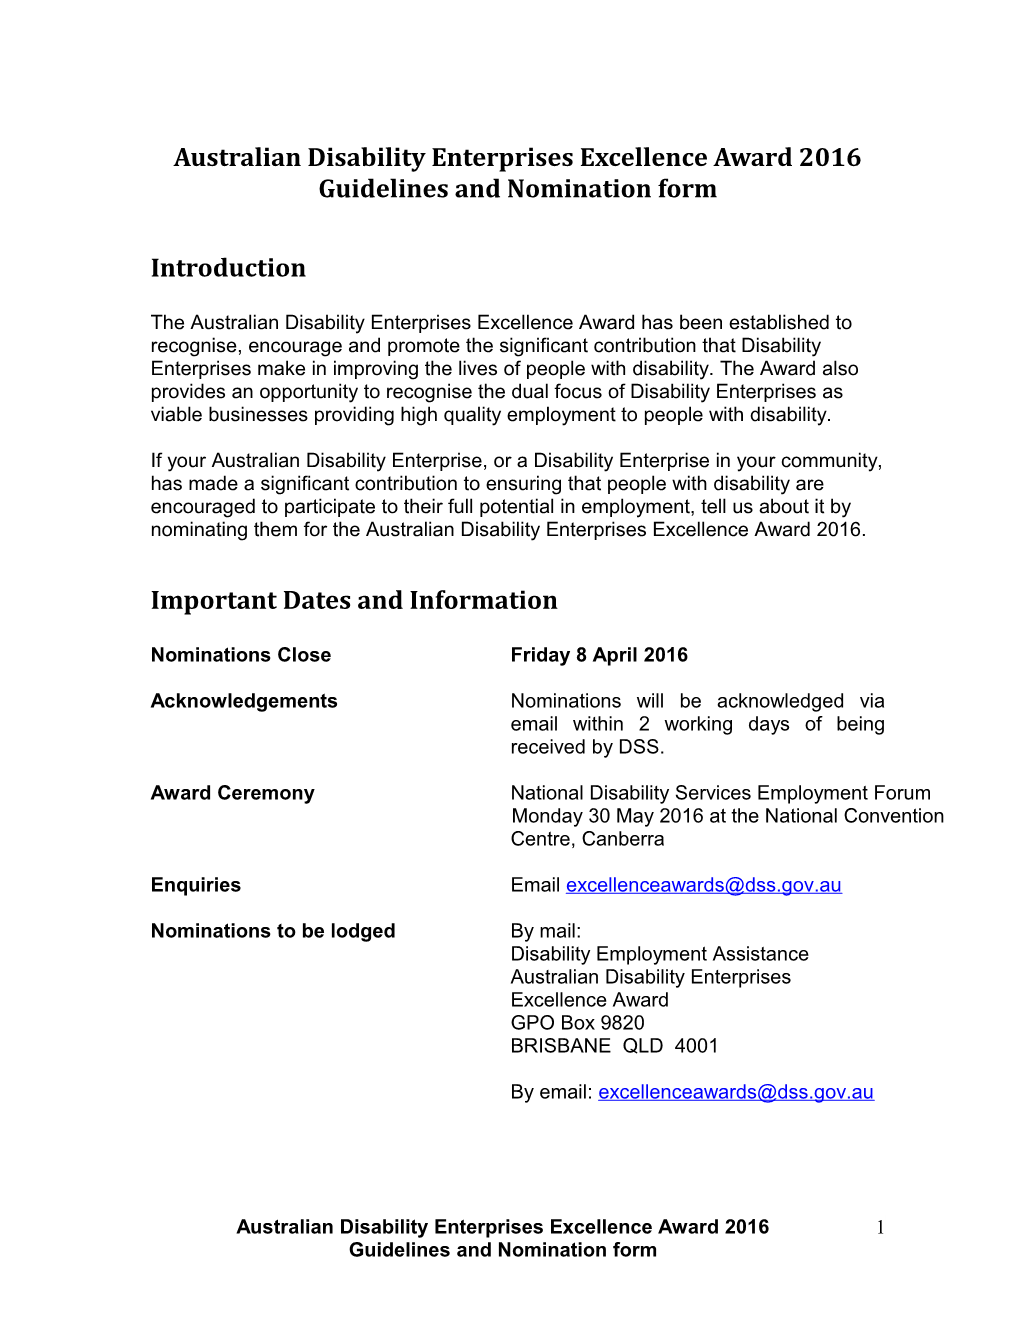 Australian Disability Enterprises Excellence Award 2016 Guidelines and Nomination Form